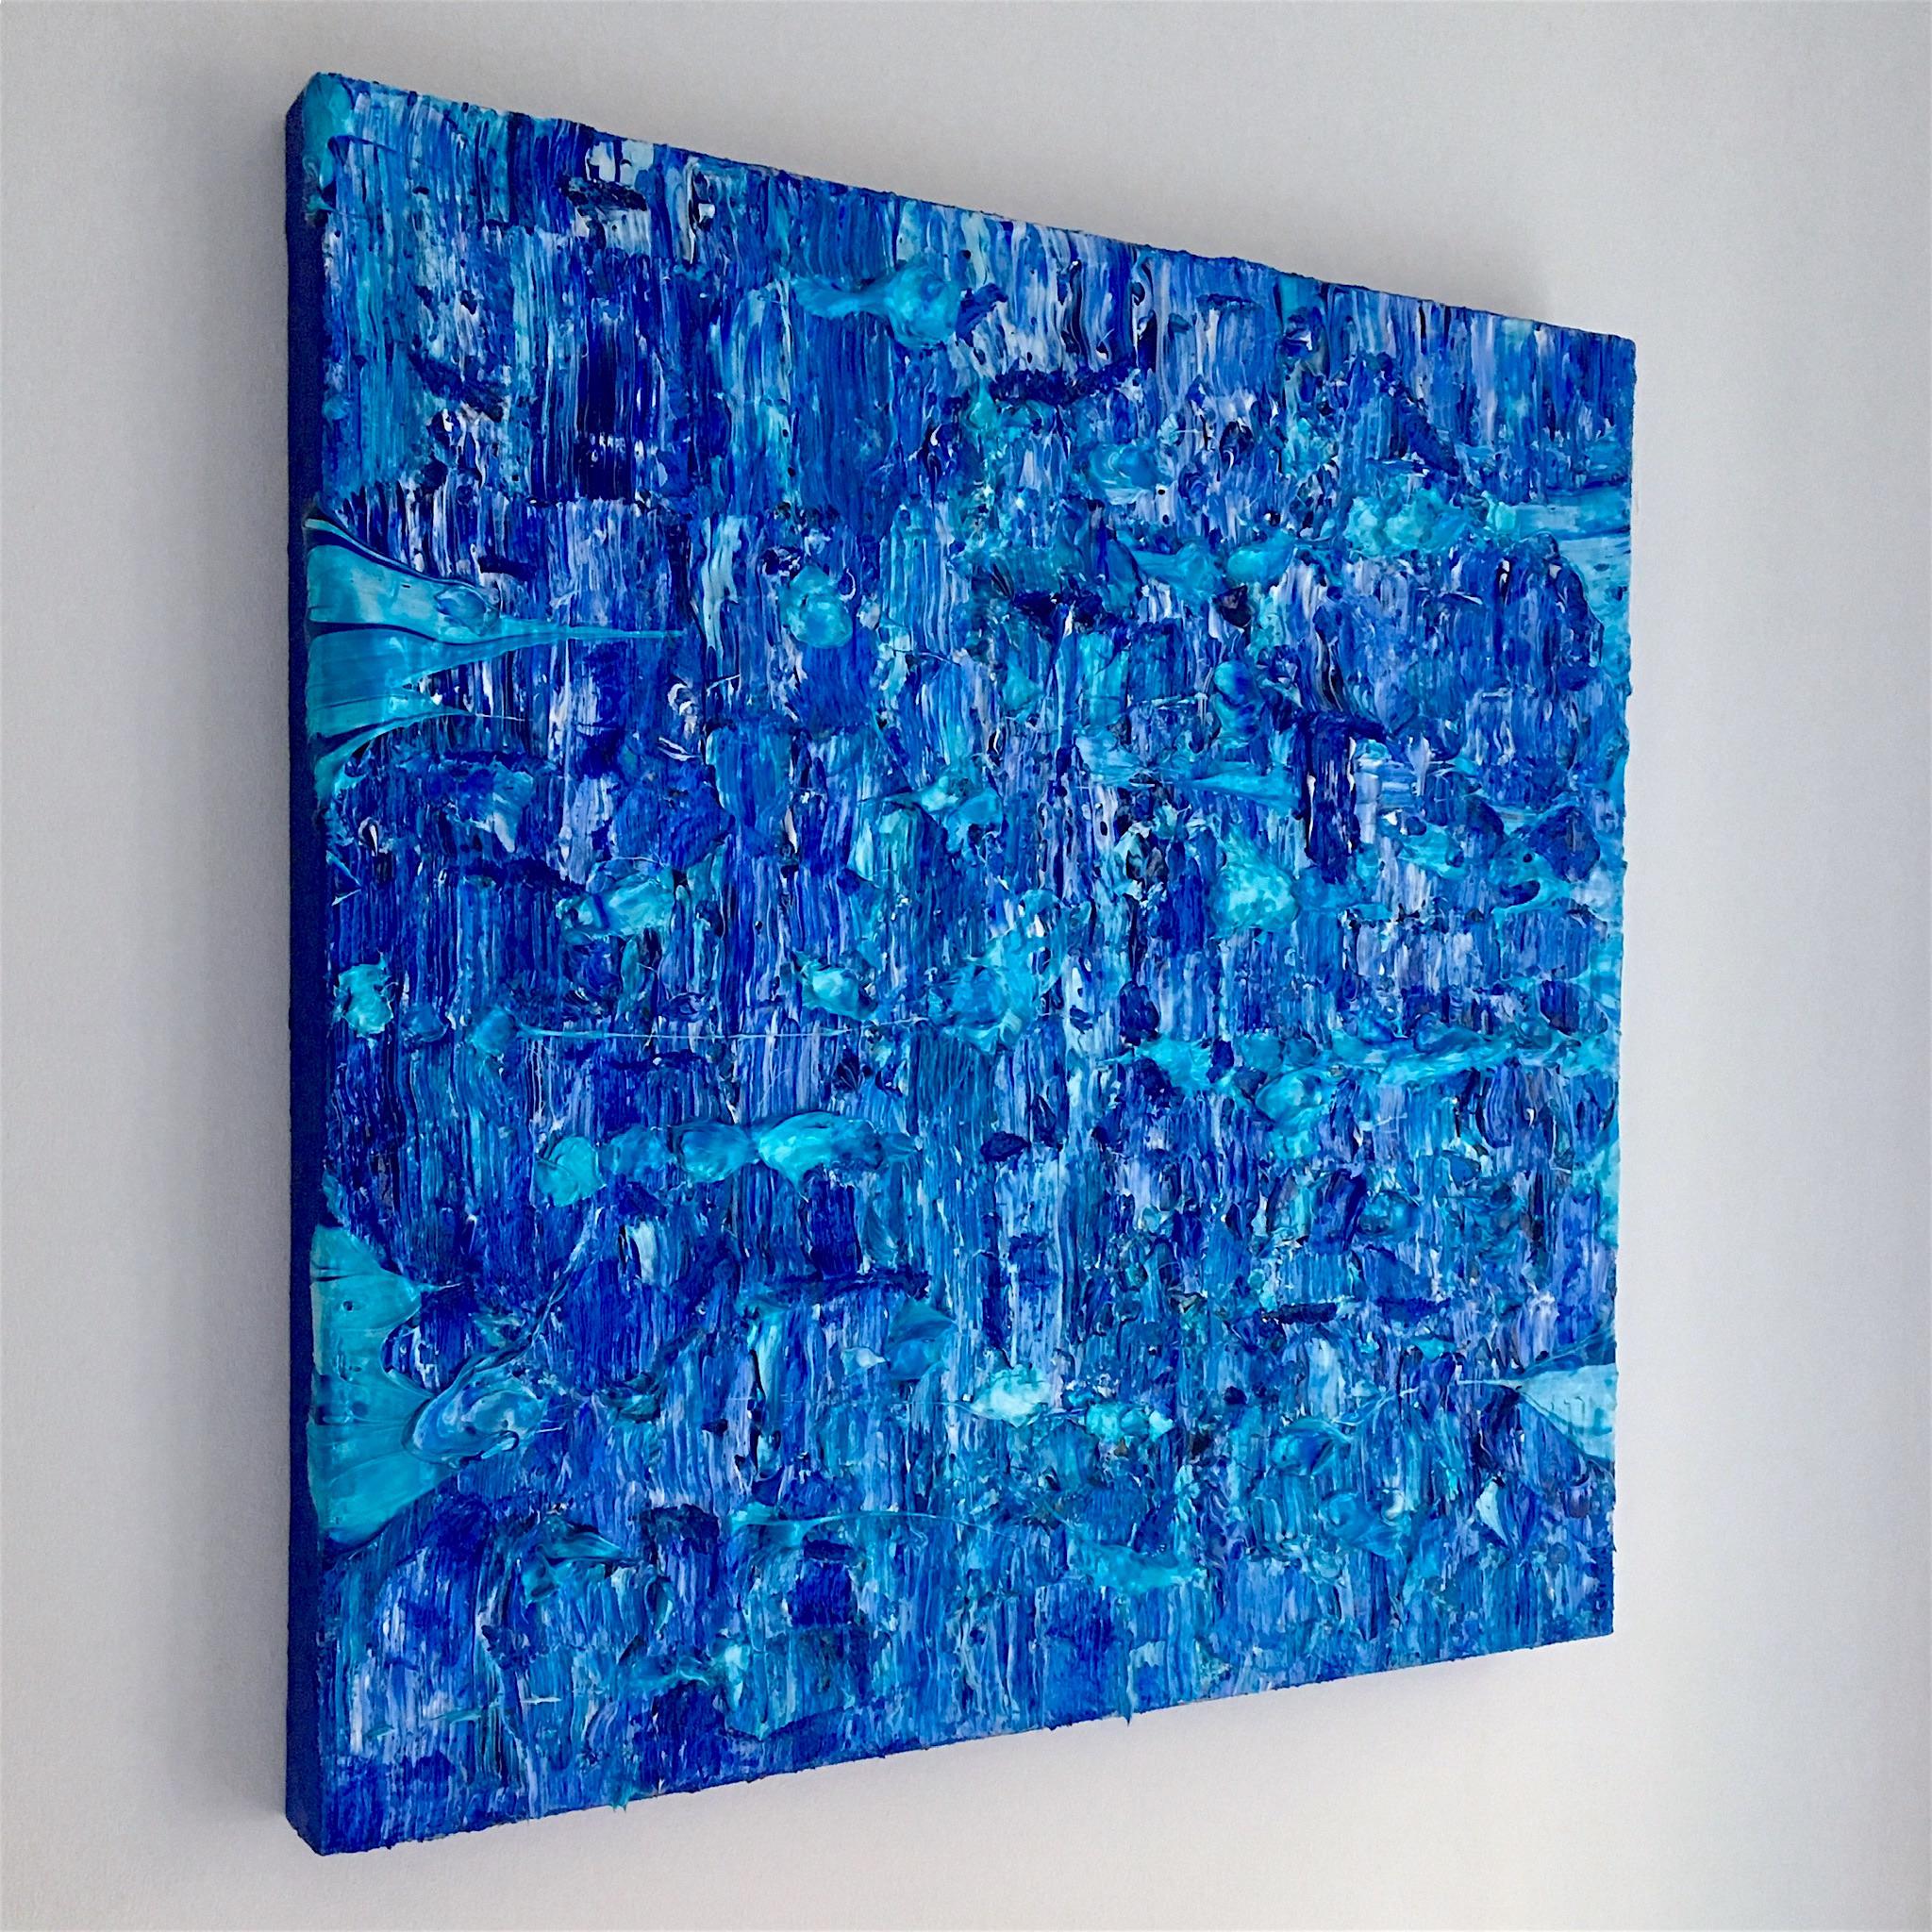 Abstract painting on canvas with heavy texture.
Acrylic and varnish for protection.
Colors: Blue 
This painting is called Marina 8 and numbered 234.
Original and signed by the artist, comes with gallery certificate.
    